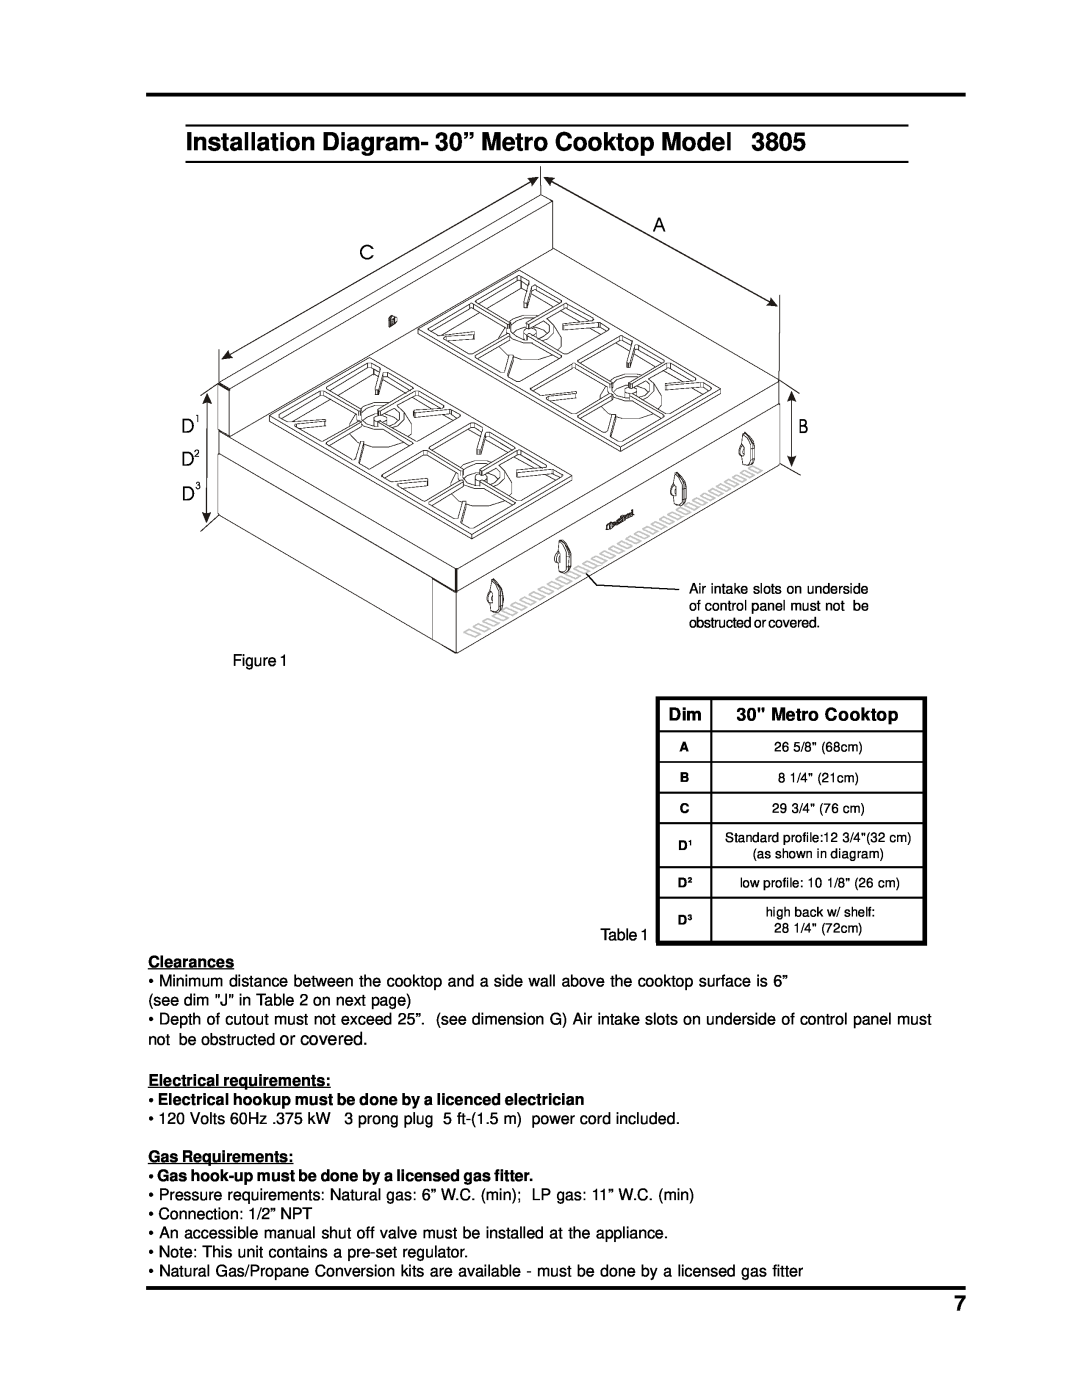 Heartland Bakeware 3805-3825 Installation Diagram- 30” Metro Cooktop Model, D2 D3, Clearances, Electrical requirements 